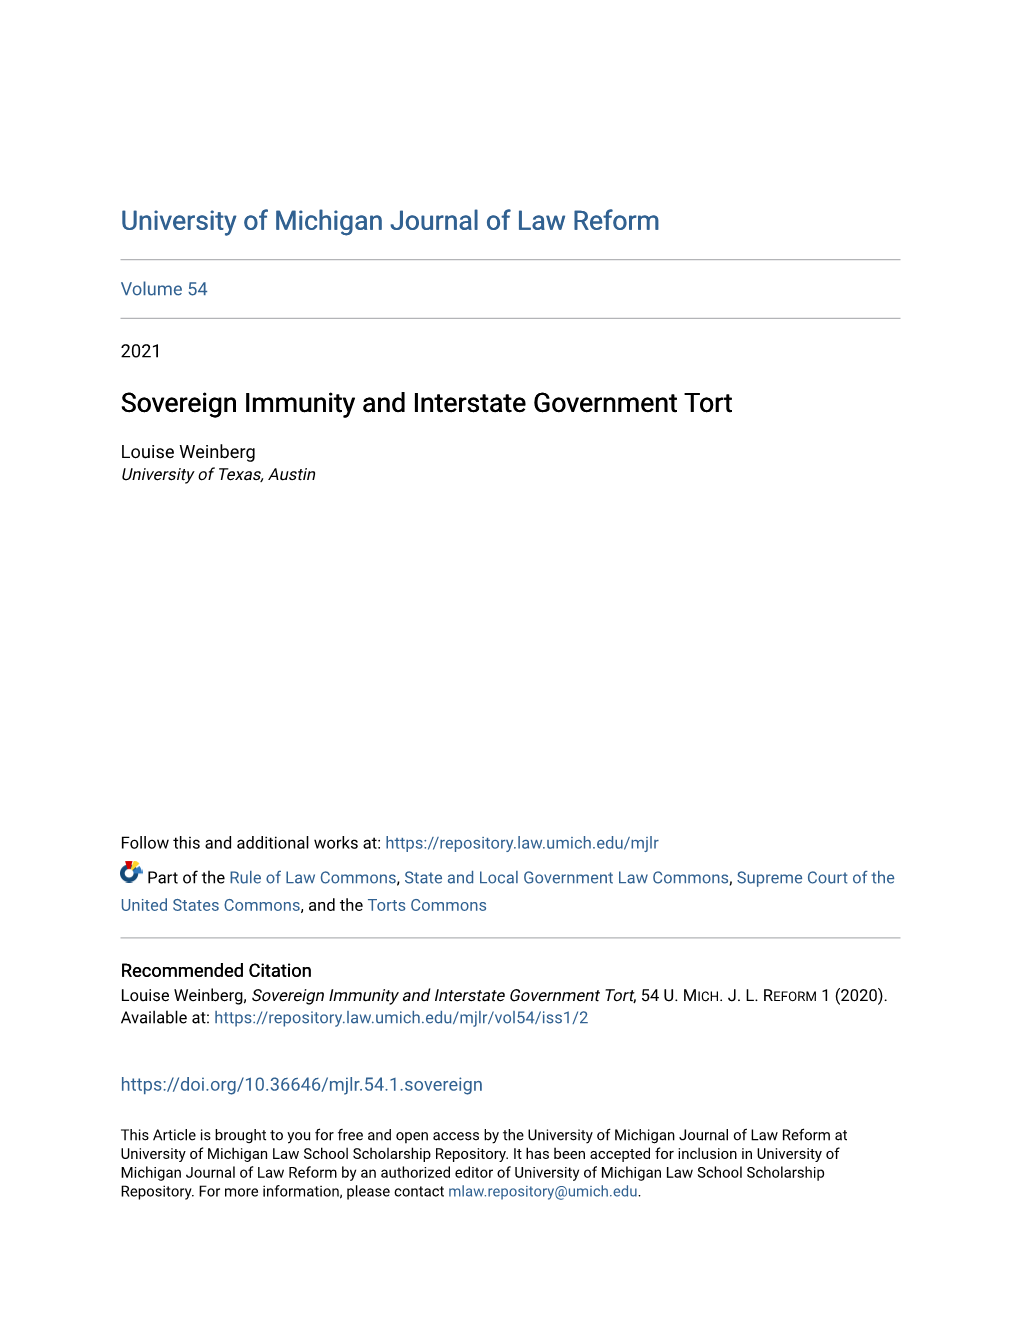 Sovereign Immunity and Interstate Government Tort